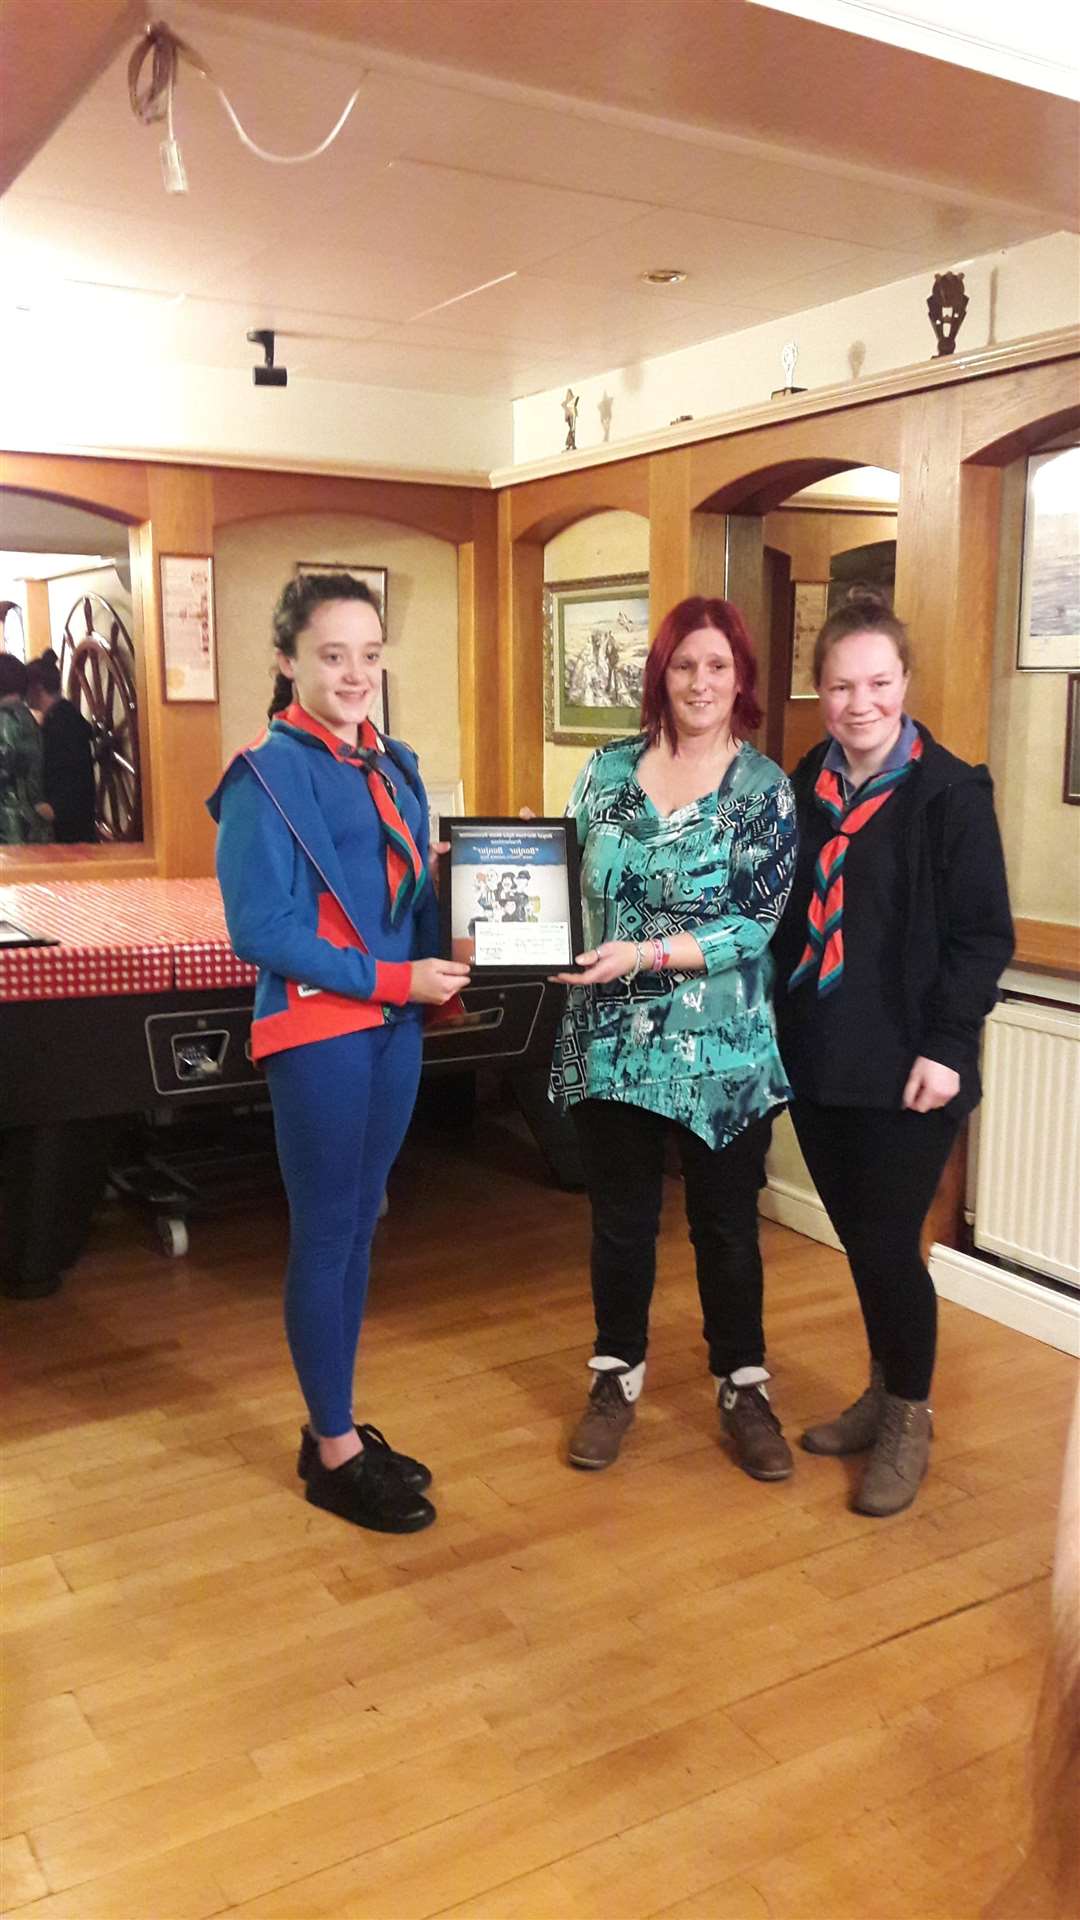 Two cheques for £300 were donated to guiding. Pictured here is Jaime Cooper receiving one for 1st Walmer Guides and a second one for Jade Hamilton for South Goodwin Division as a whole